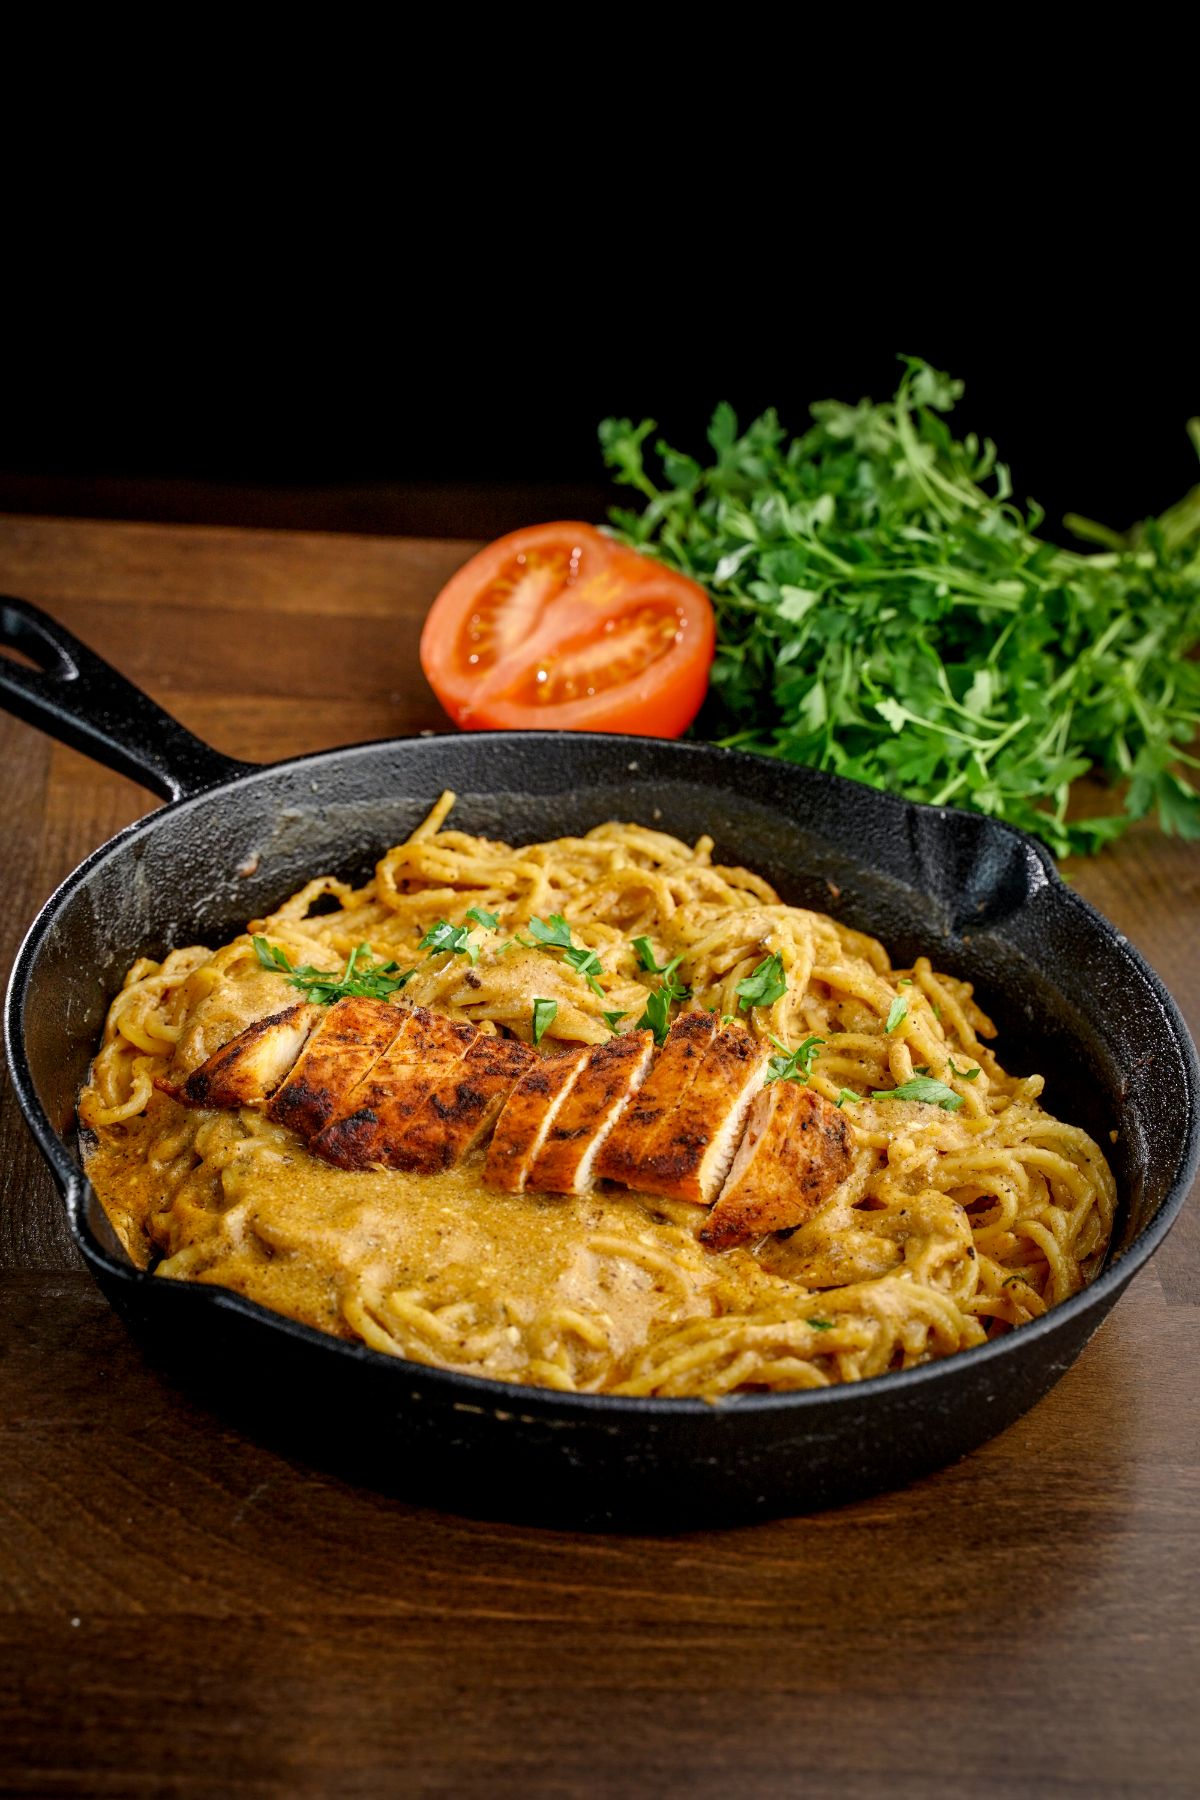 cast iron skillet of pasta with sliced chicken on wood table with black background